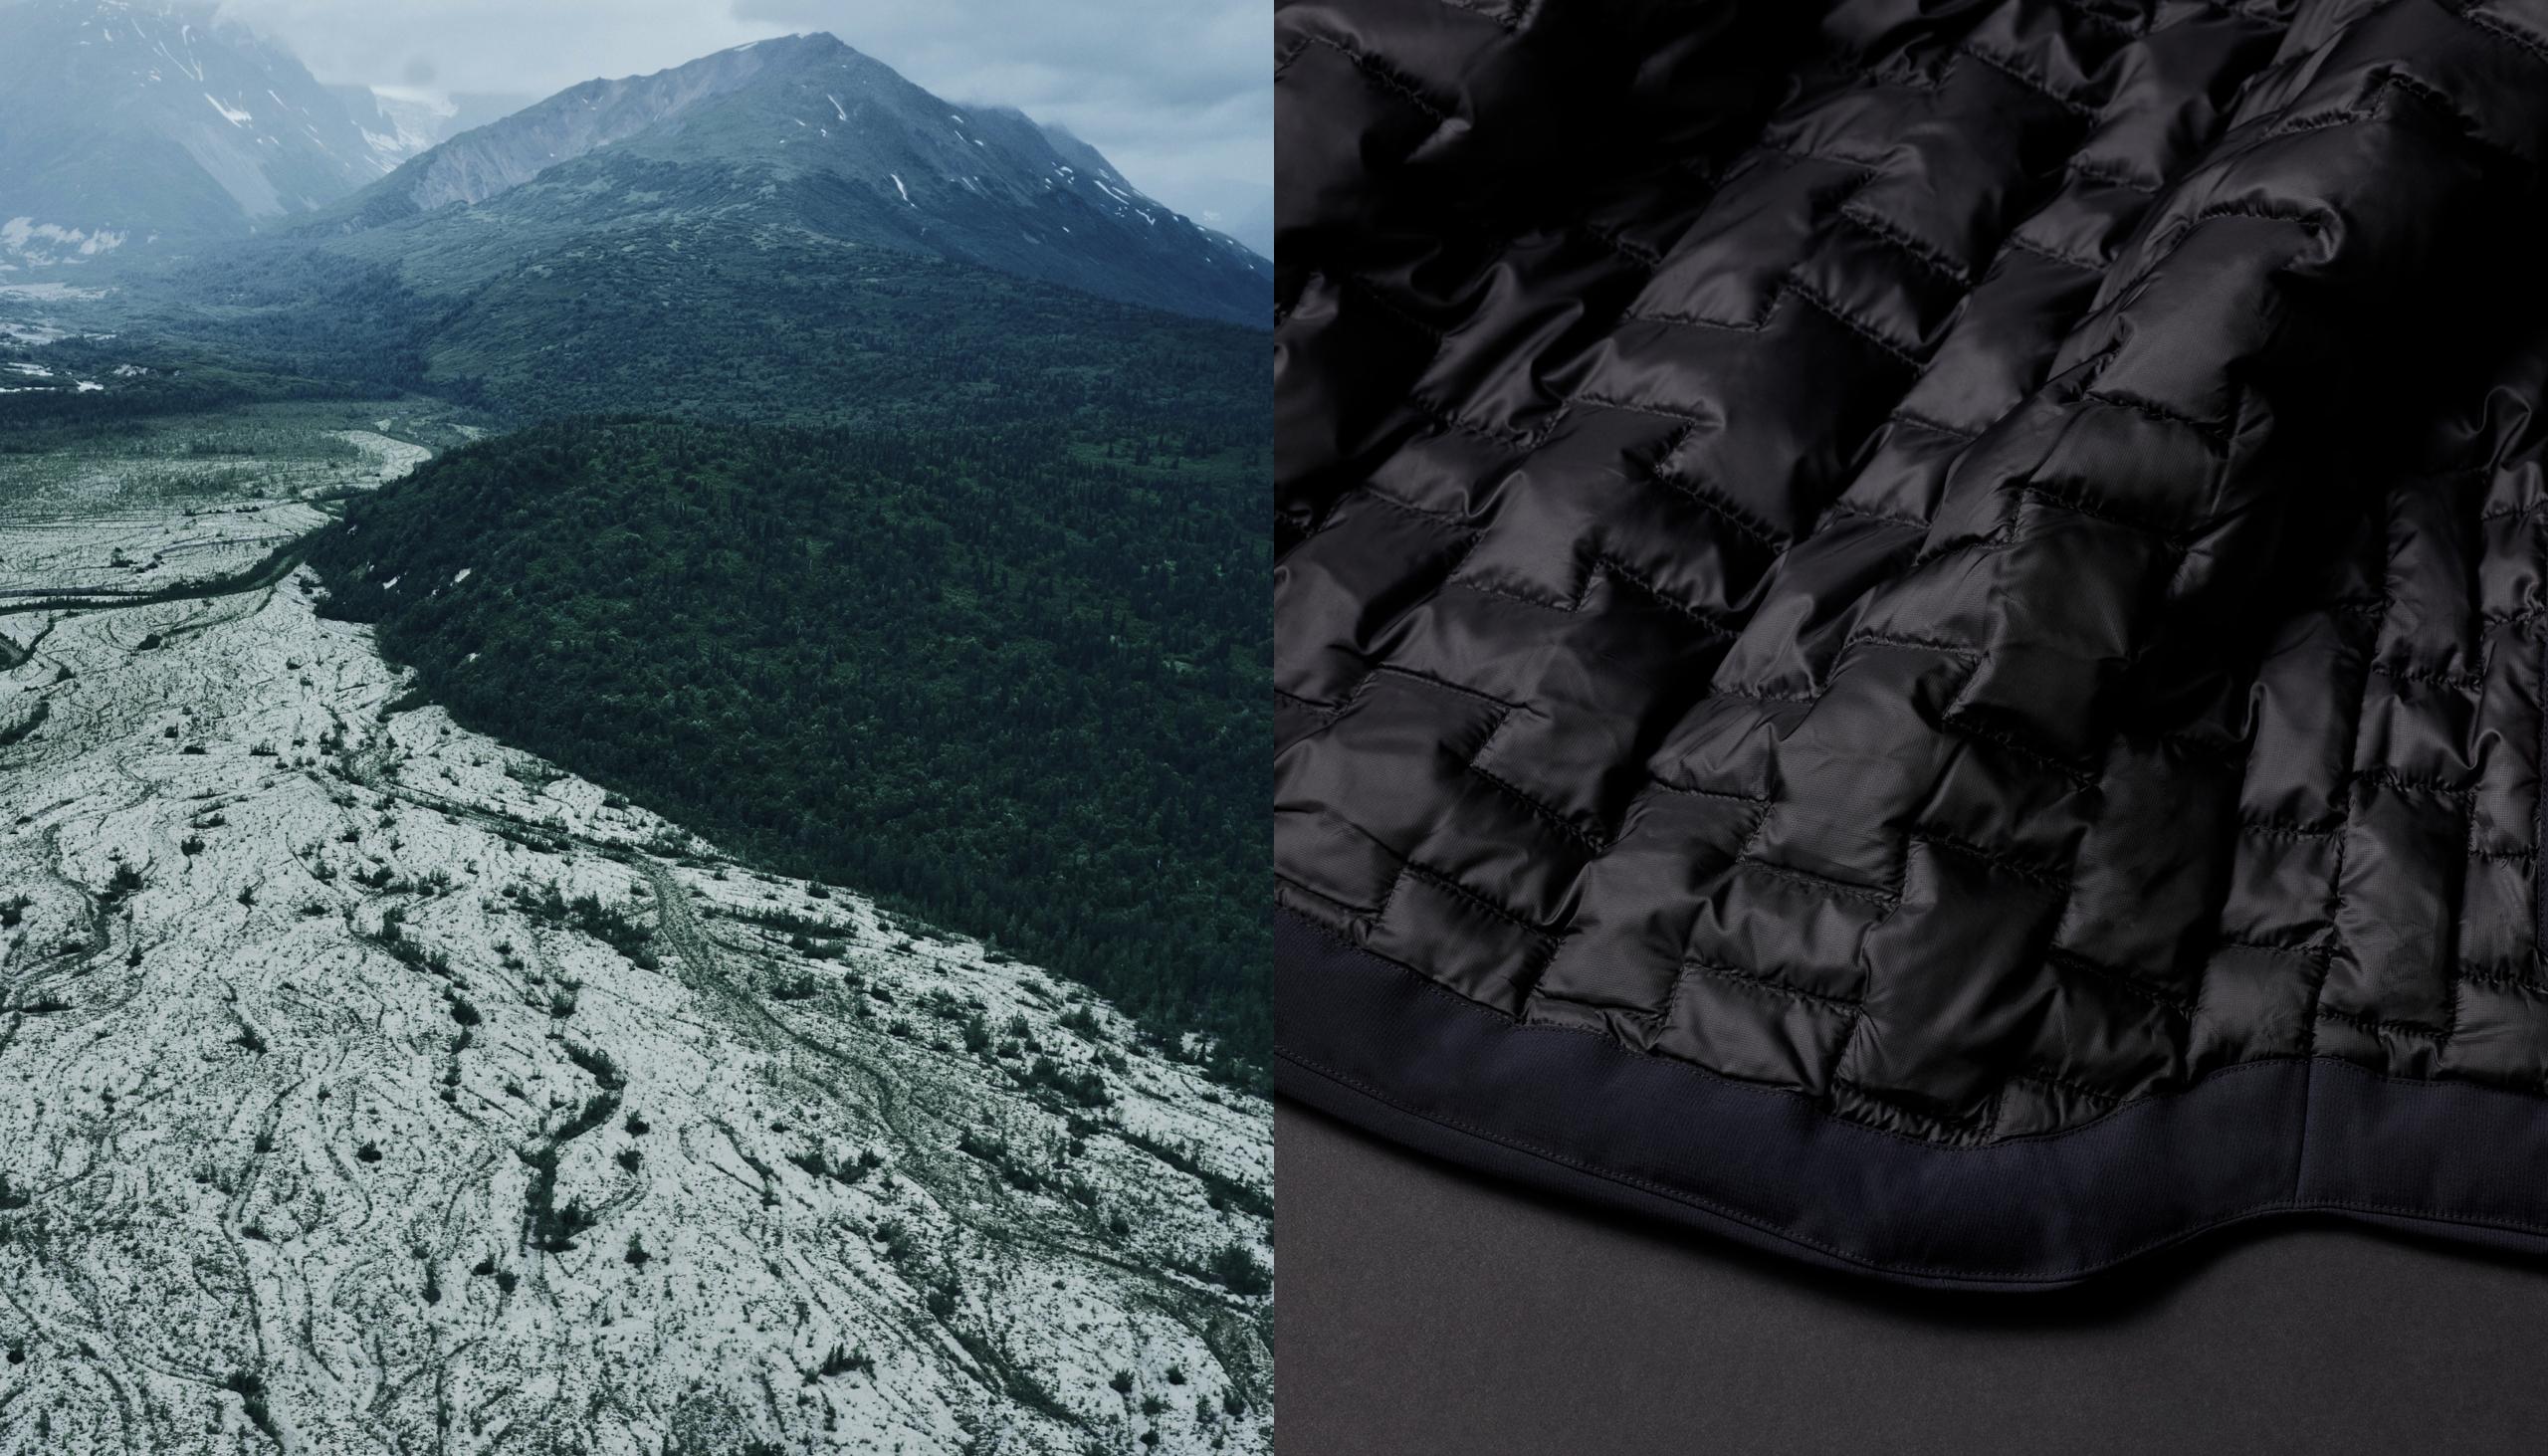 Mountainscape of Alaska and detail of Silverton Down Jacket